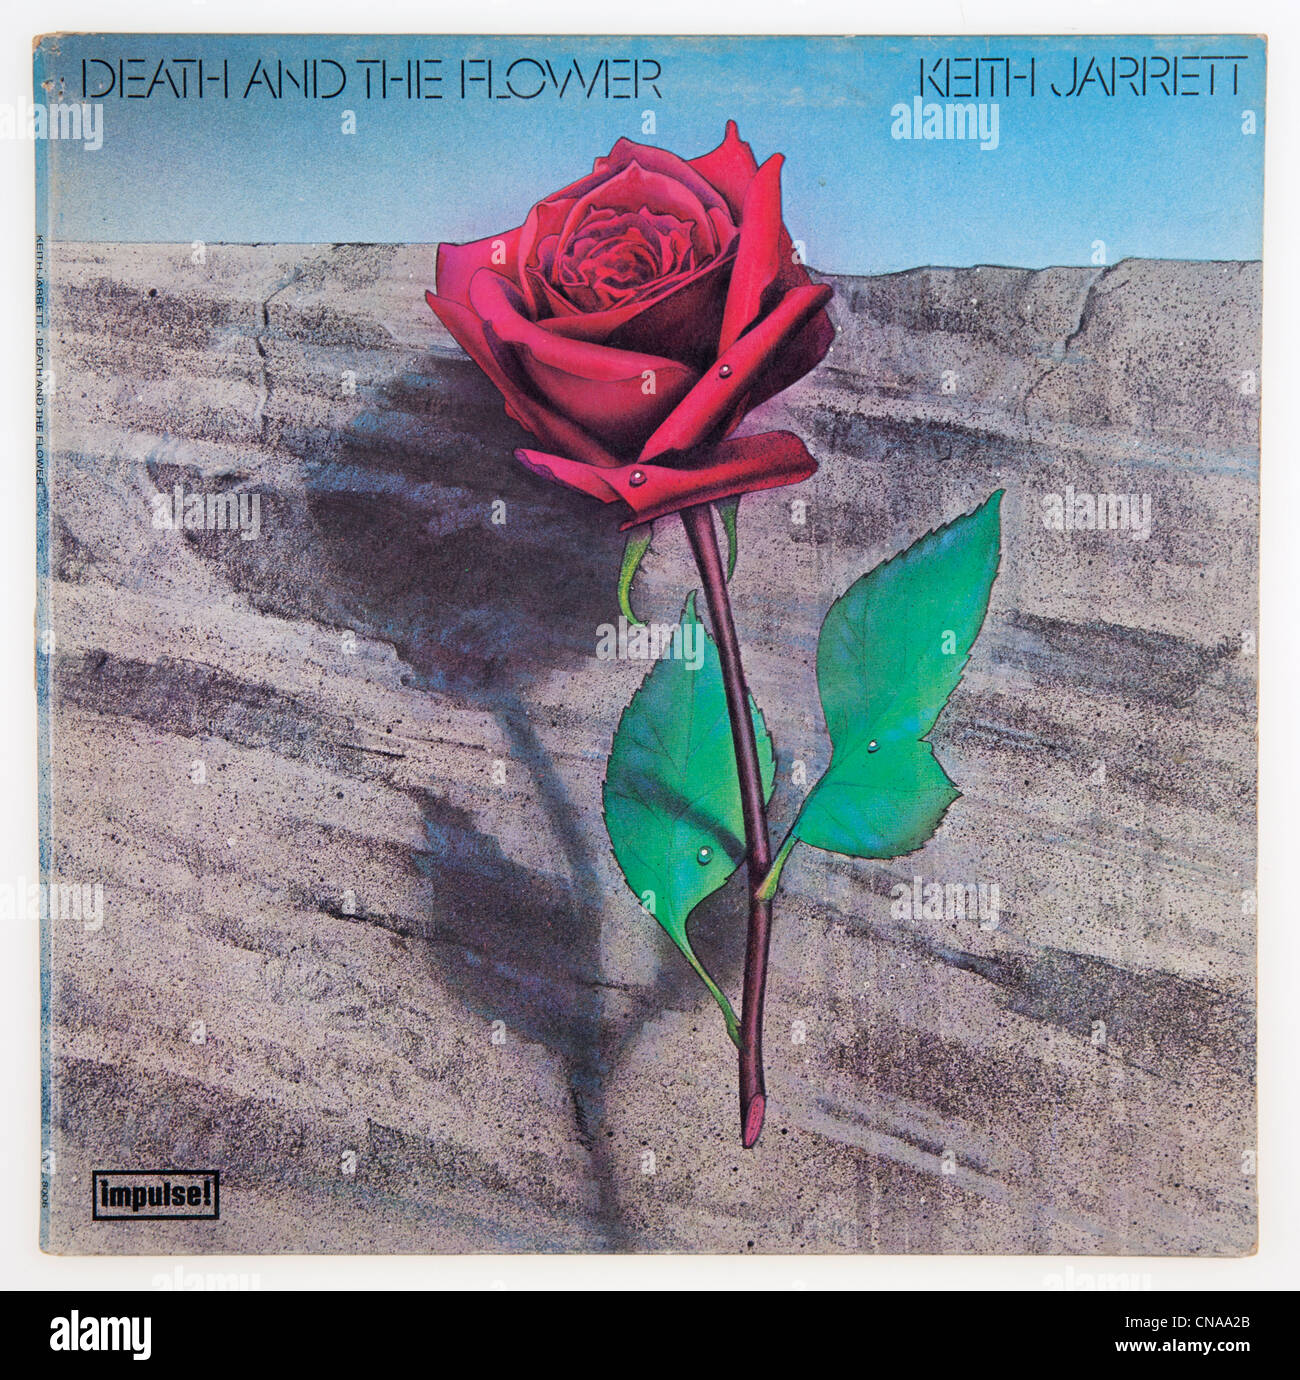 Cover of vinyl album Death and the Flower by Keith Jarrett, released 1975 on Impulse Records Stock Photo